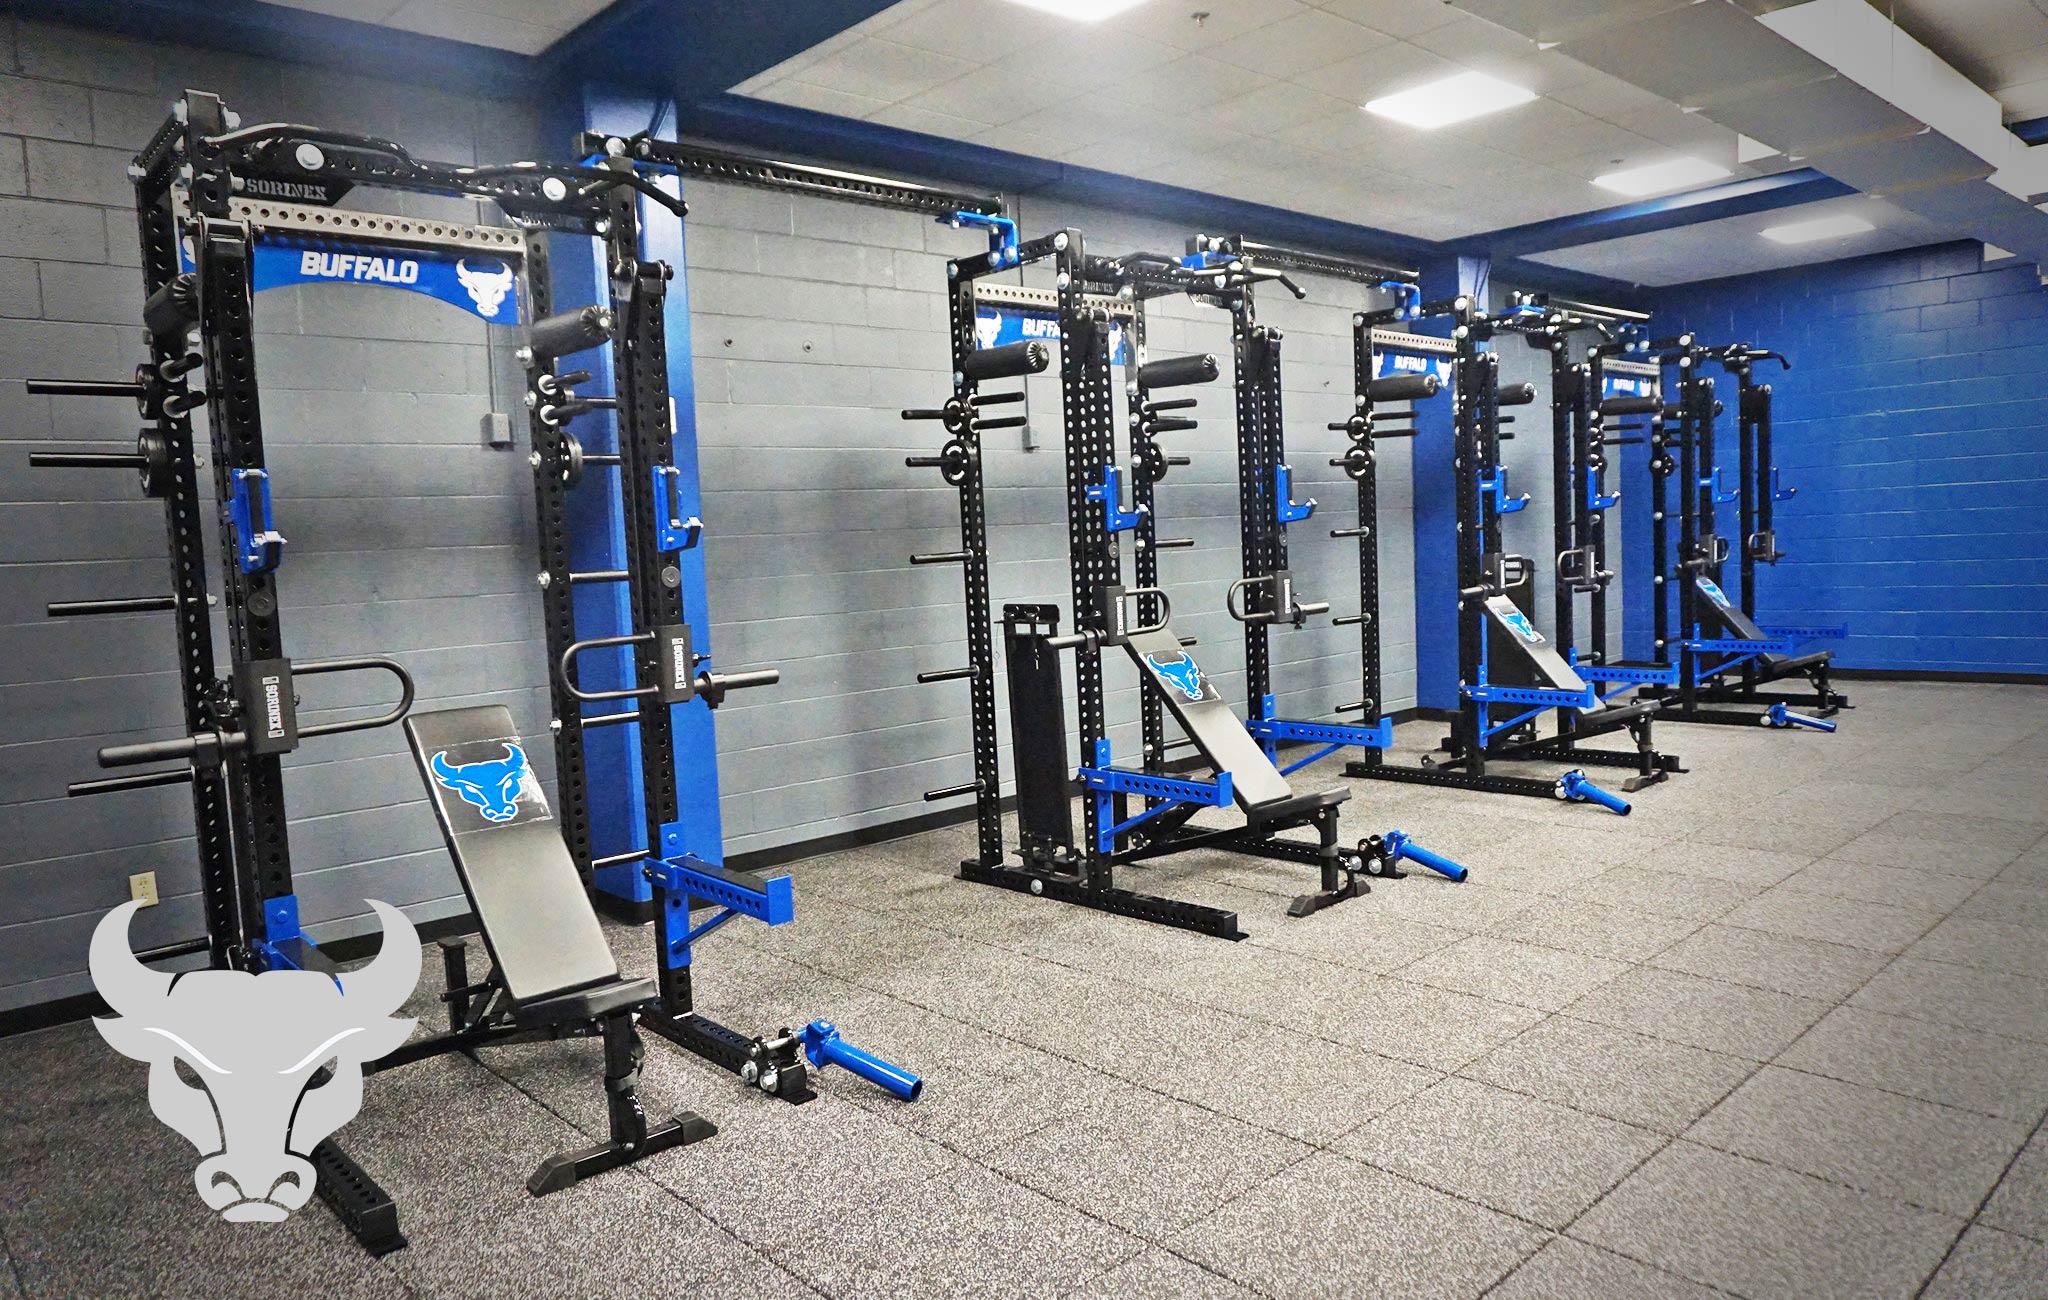 University of Buffalo Sorinex strength and conditioning facility